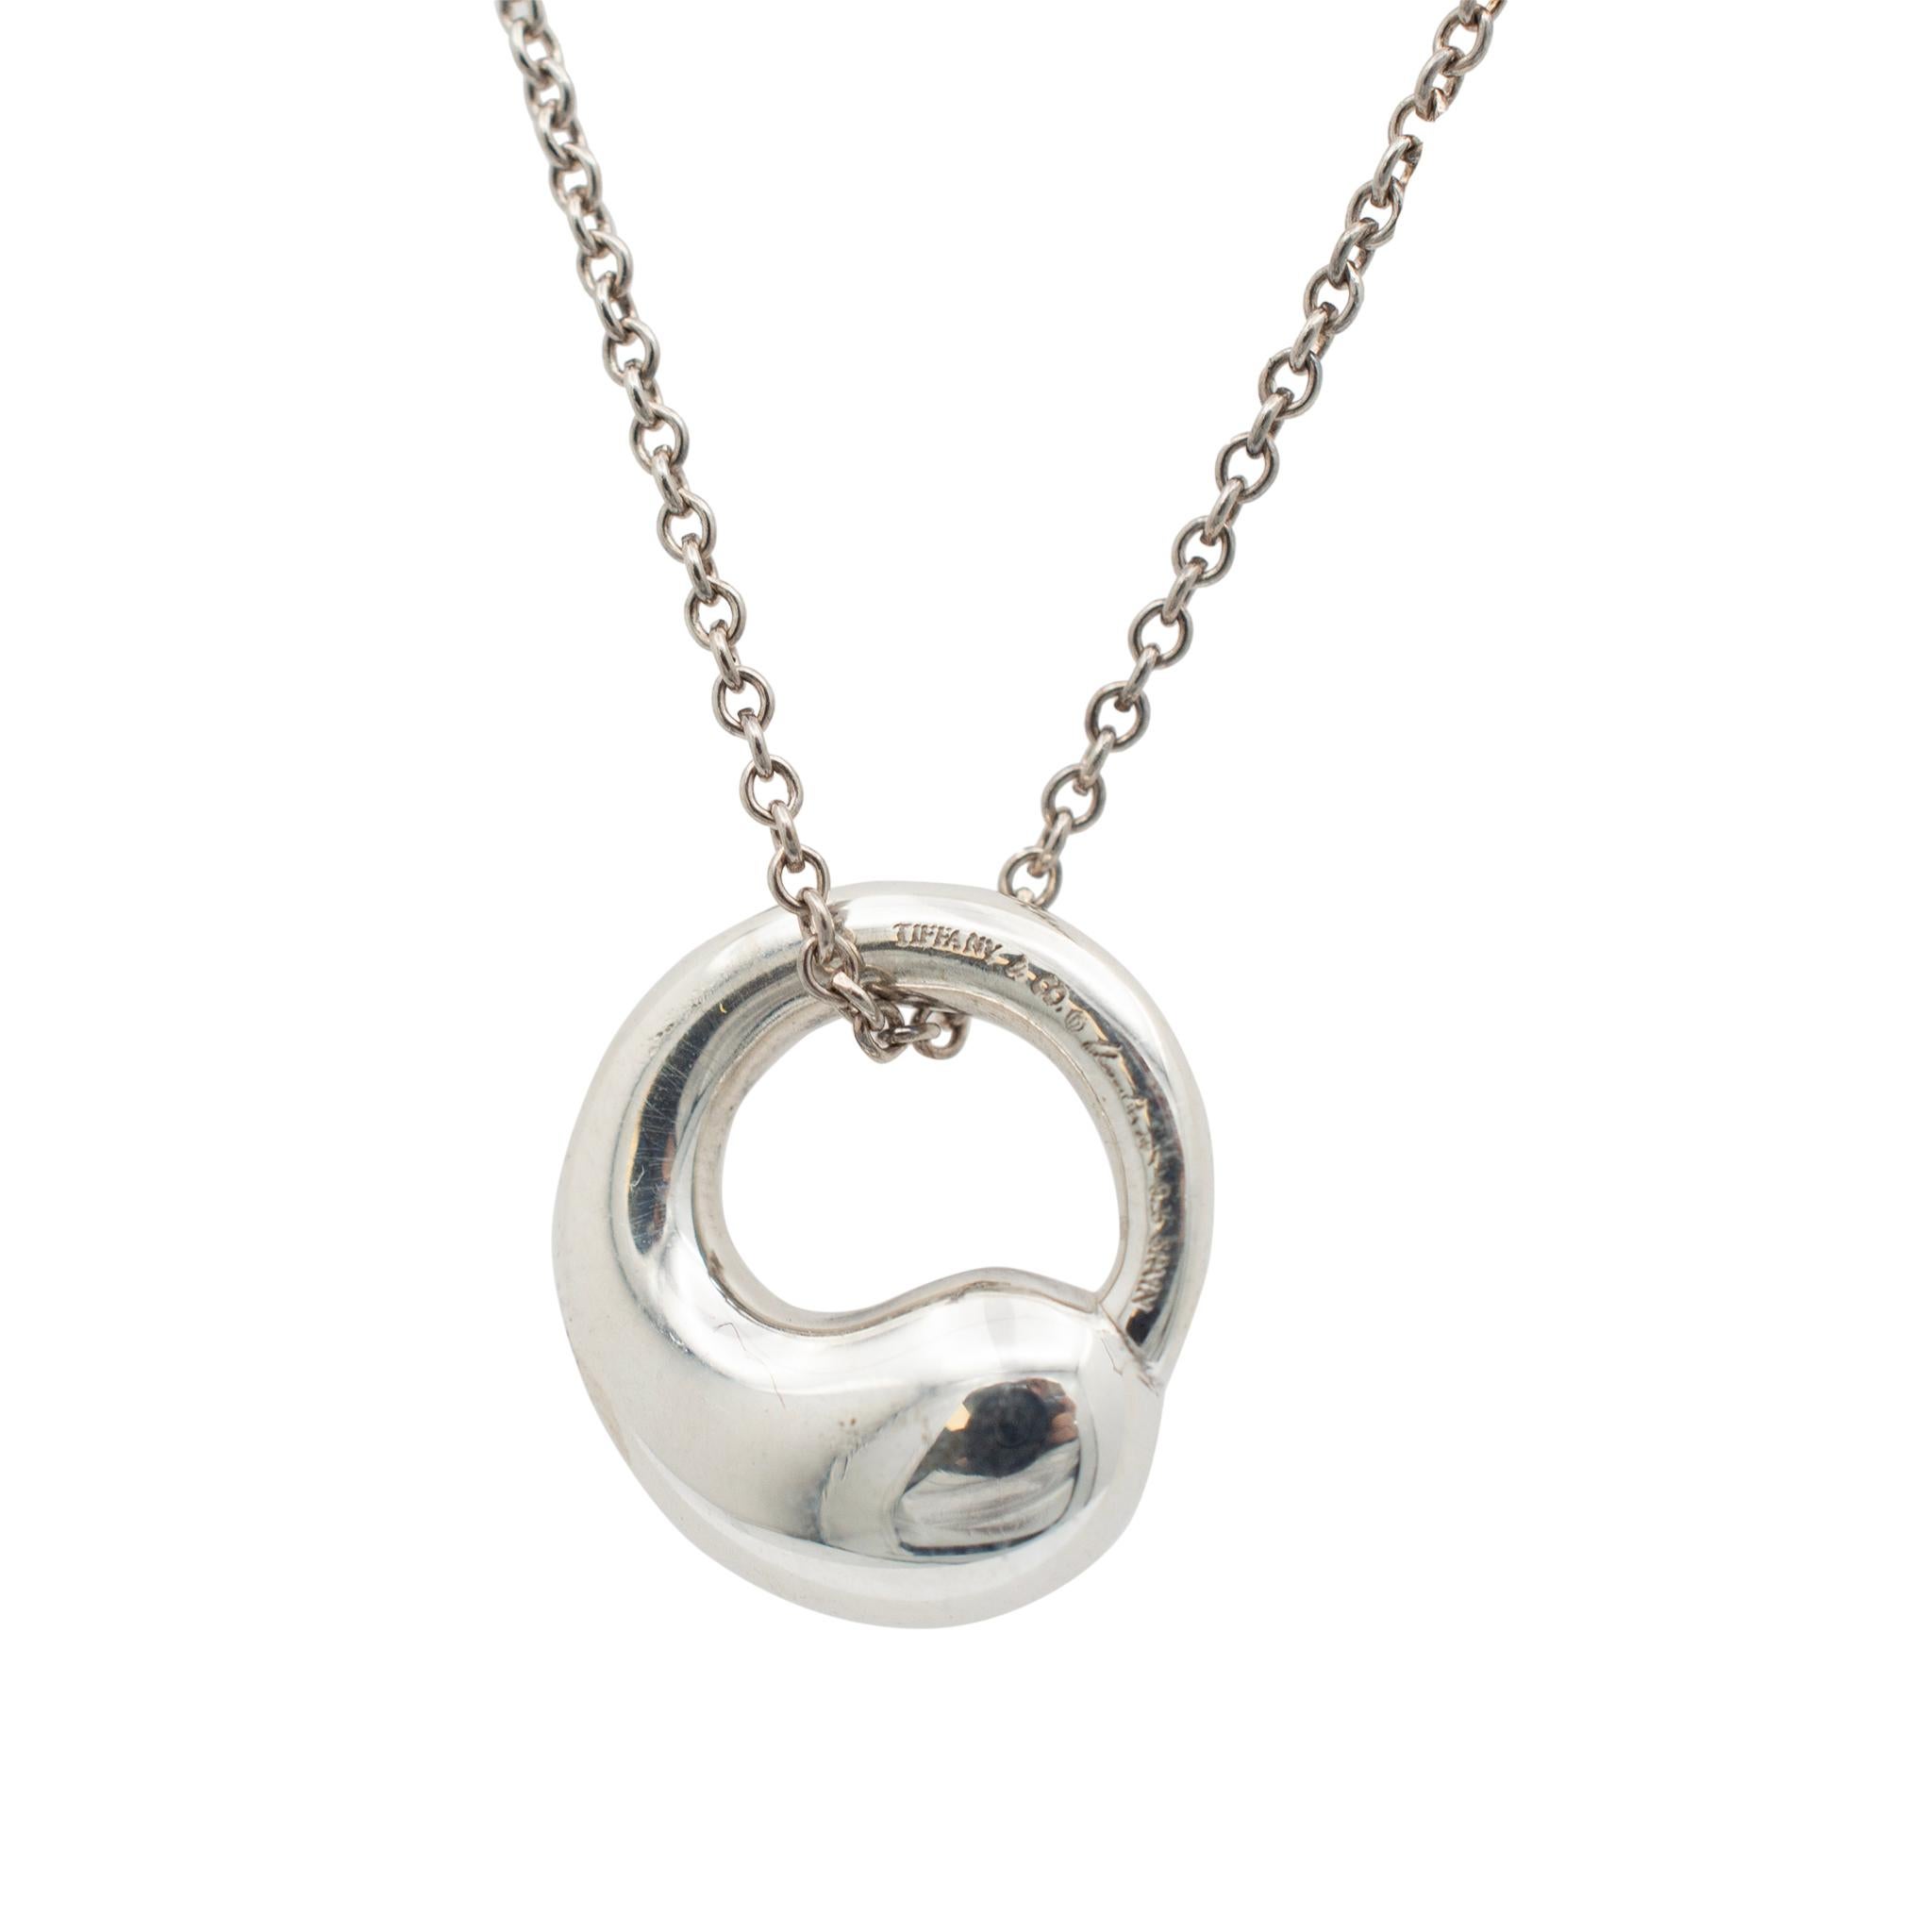 Gender: Ladies

Metal Type: 925 Sterling Silver

Length: 16.00 Inches

Width: 1.15 mm

Weight: 1.00 Grams

Diameter: 14.00 mm

Pendant Weight: 2.60 grams

Ladies 925 sterling silver cable link chain. Engraved with 